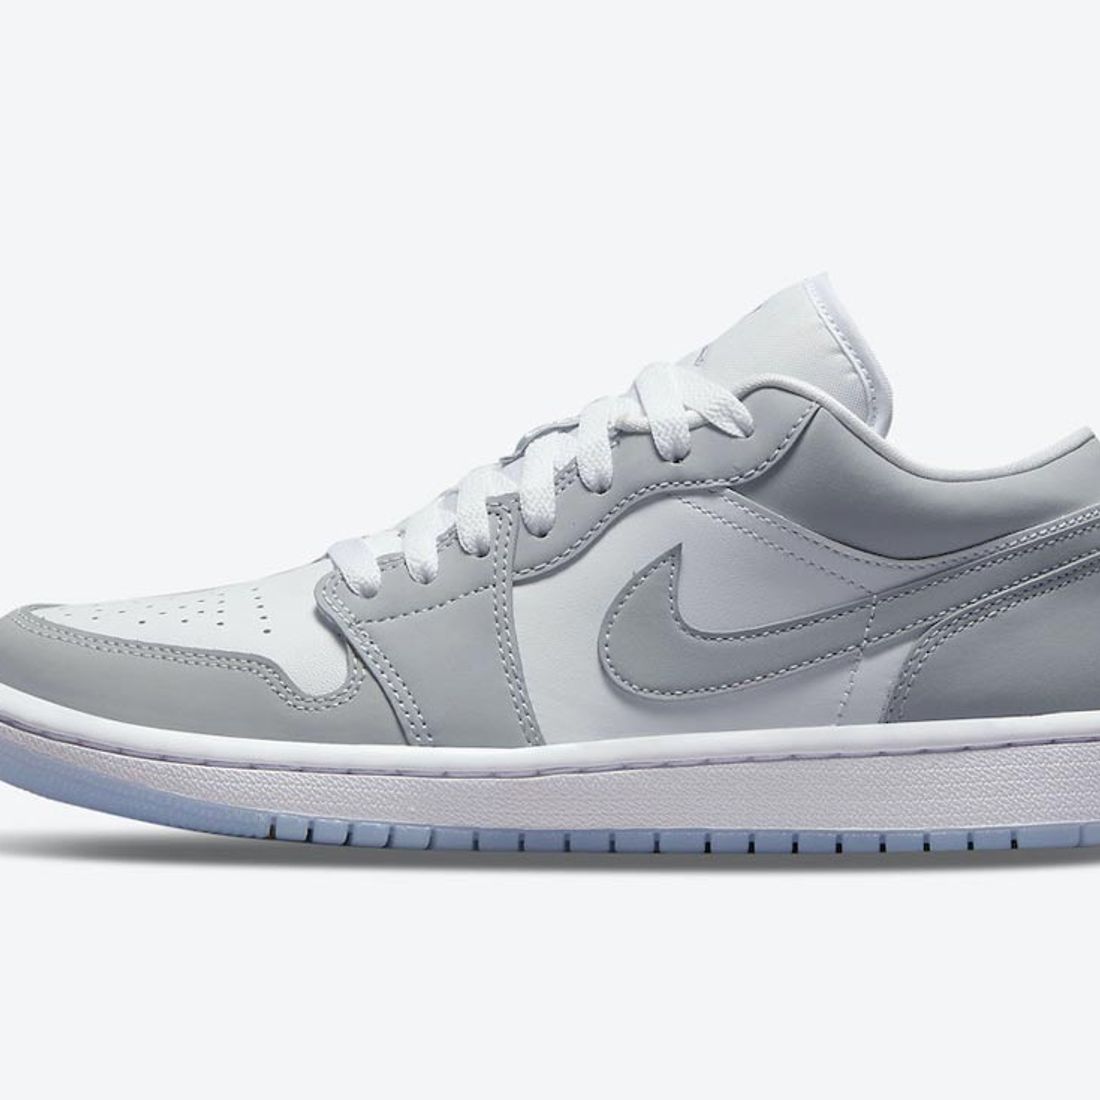 The Air Jordan 1 Low Bares Its Claws In Wolf Grey Sneaker Freaker